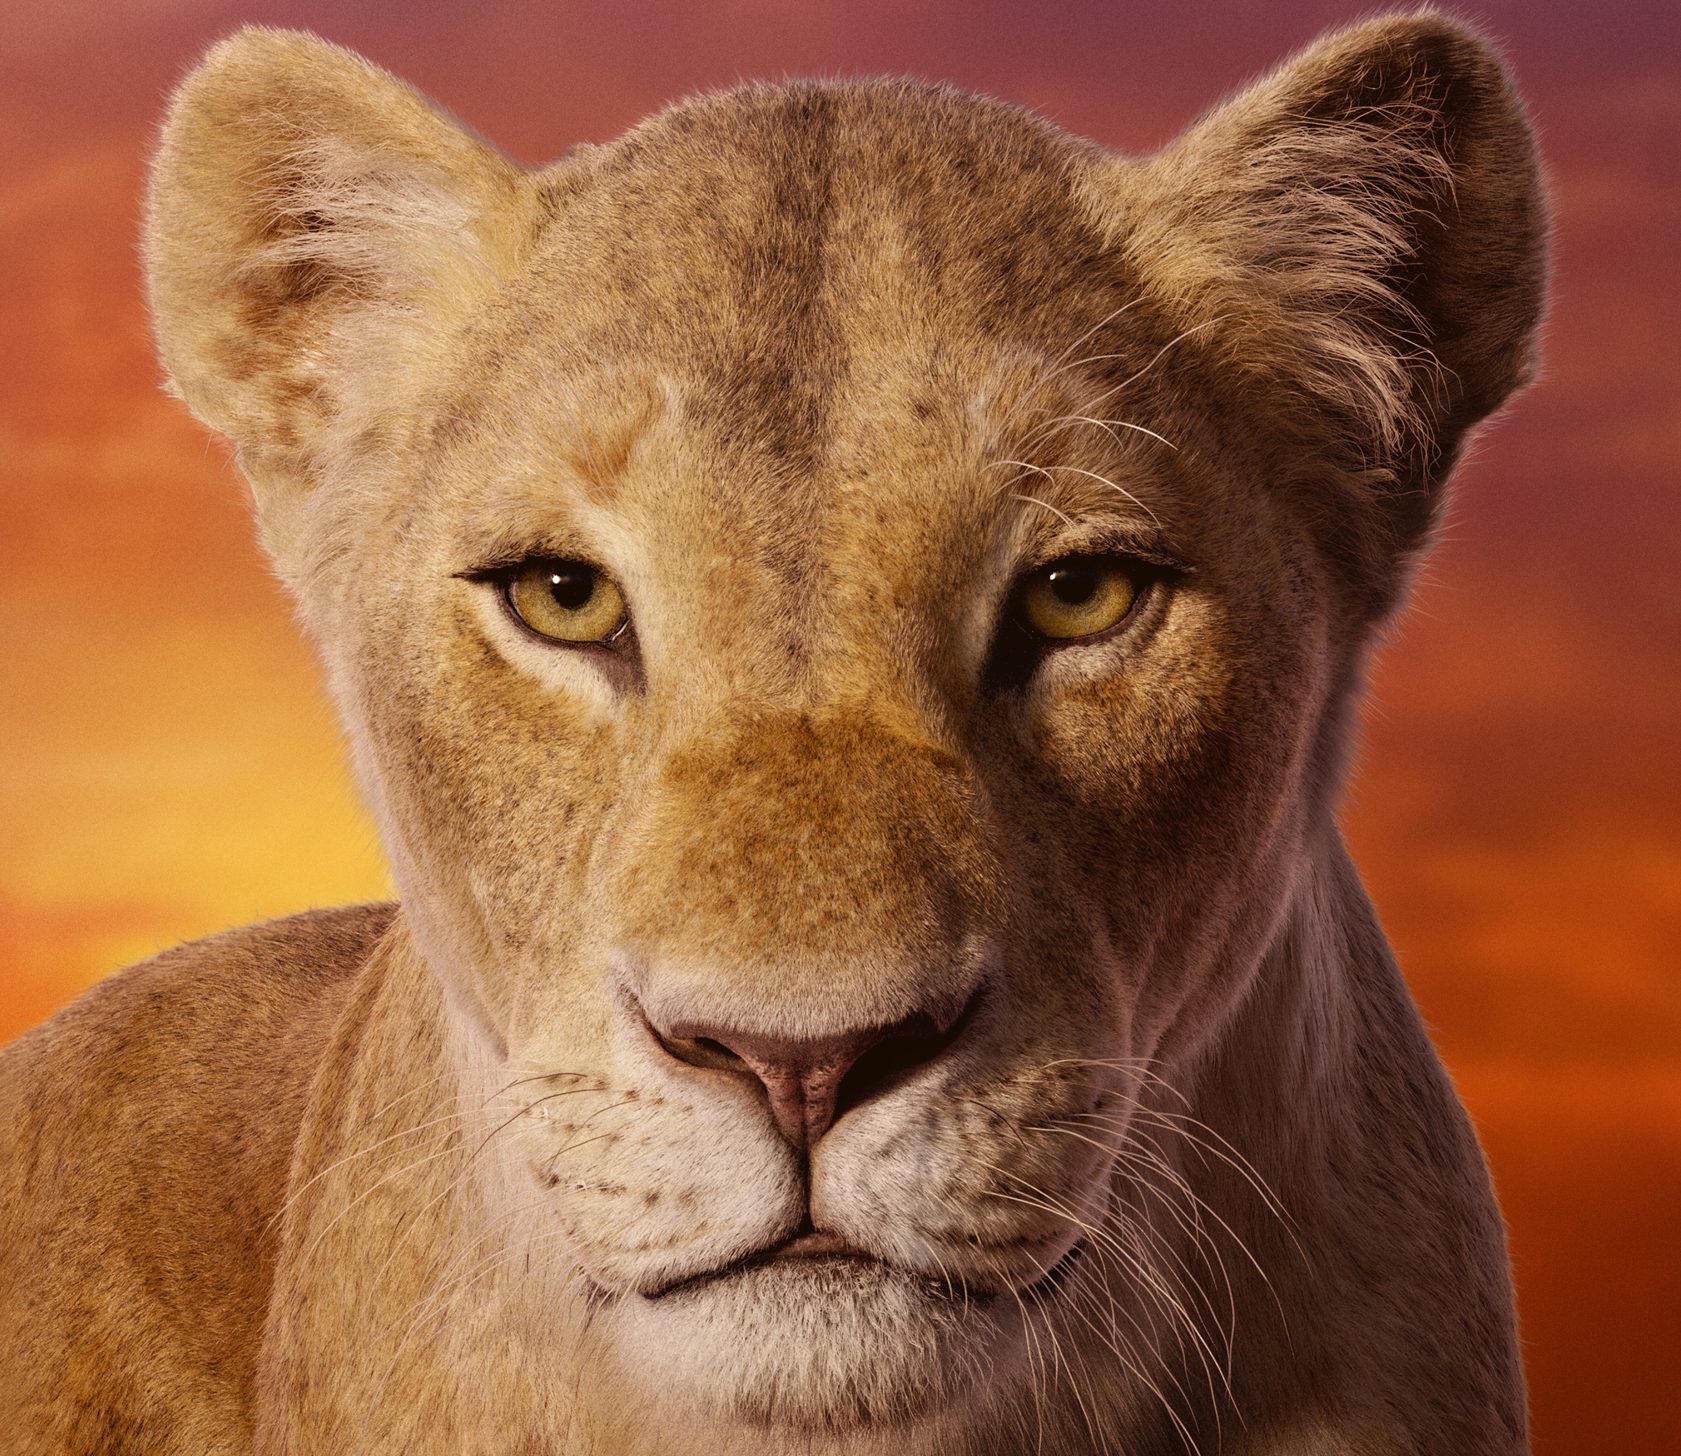 download the last version for windows The Lion King